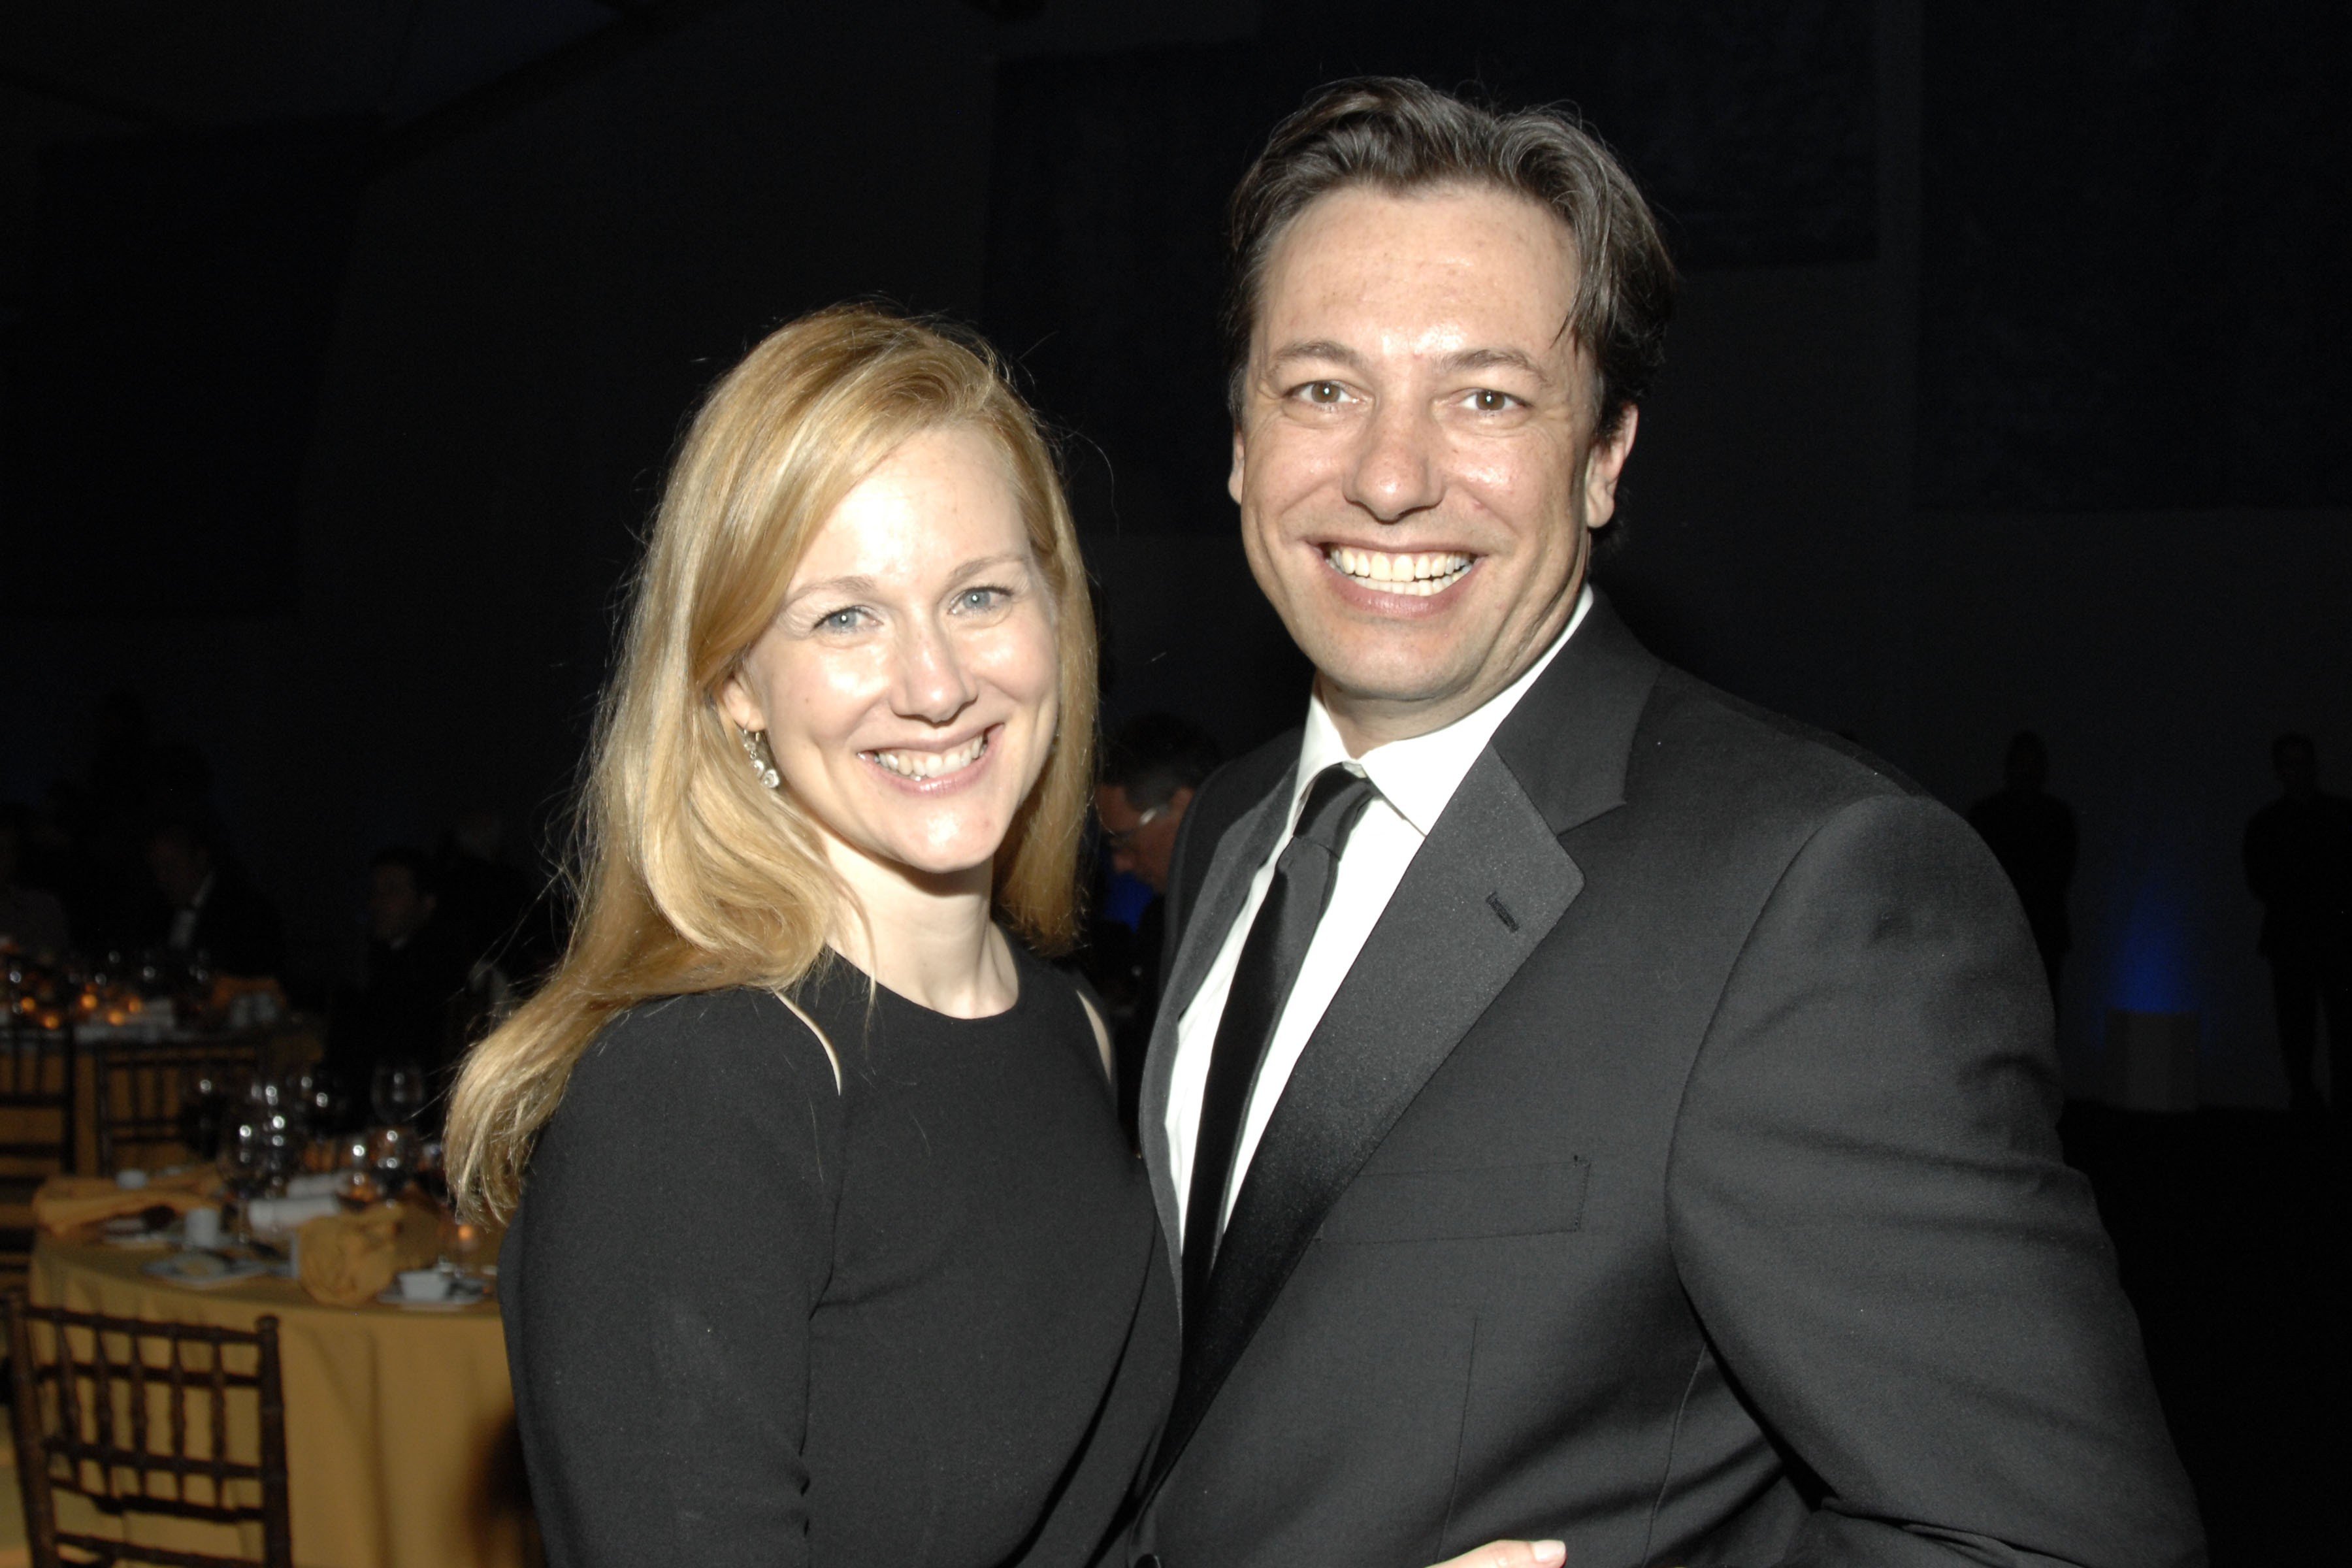 Who Is Laura Linney's Husband? Know About Her Personal Life!